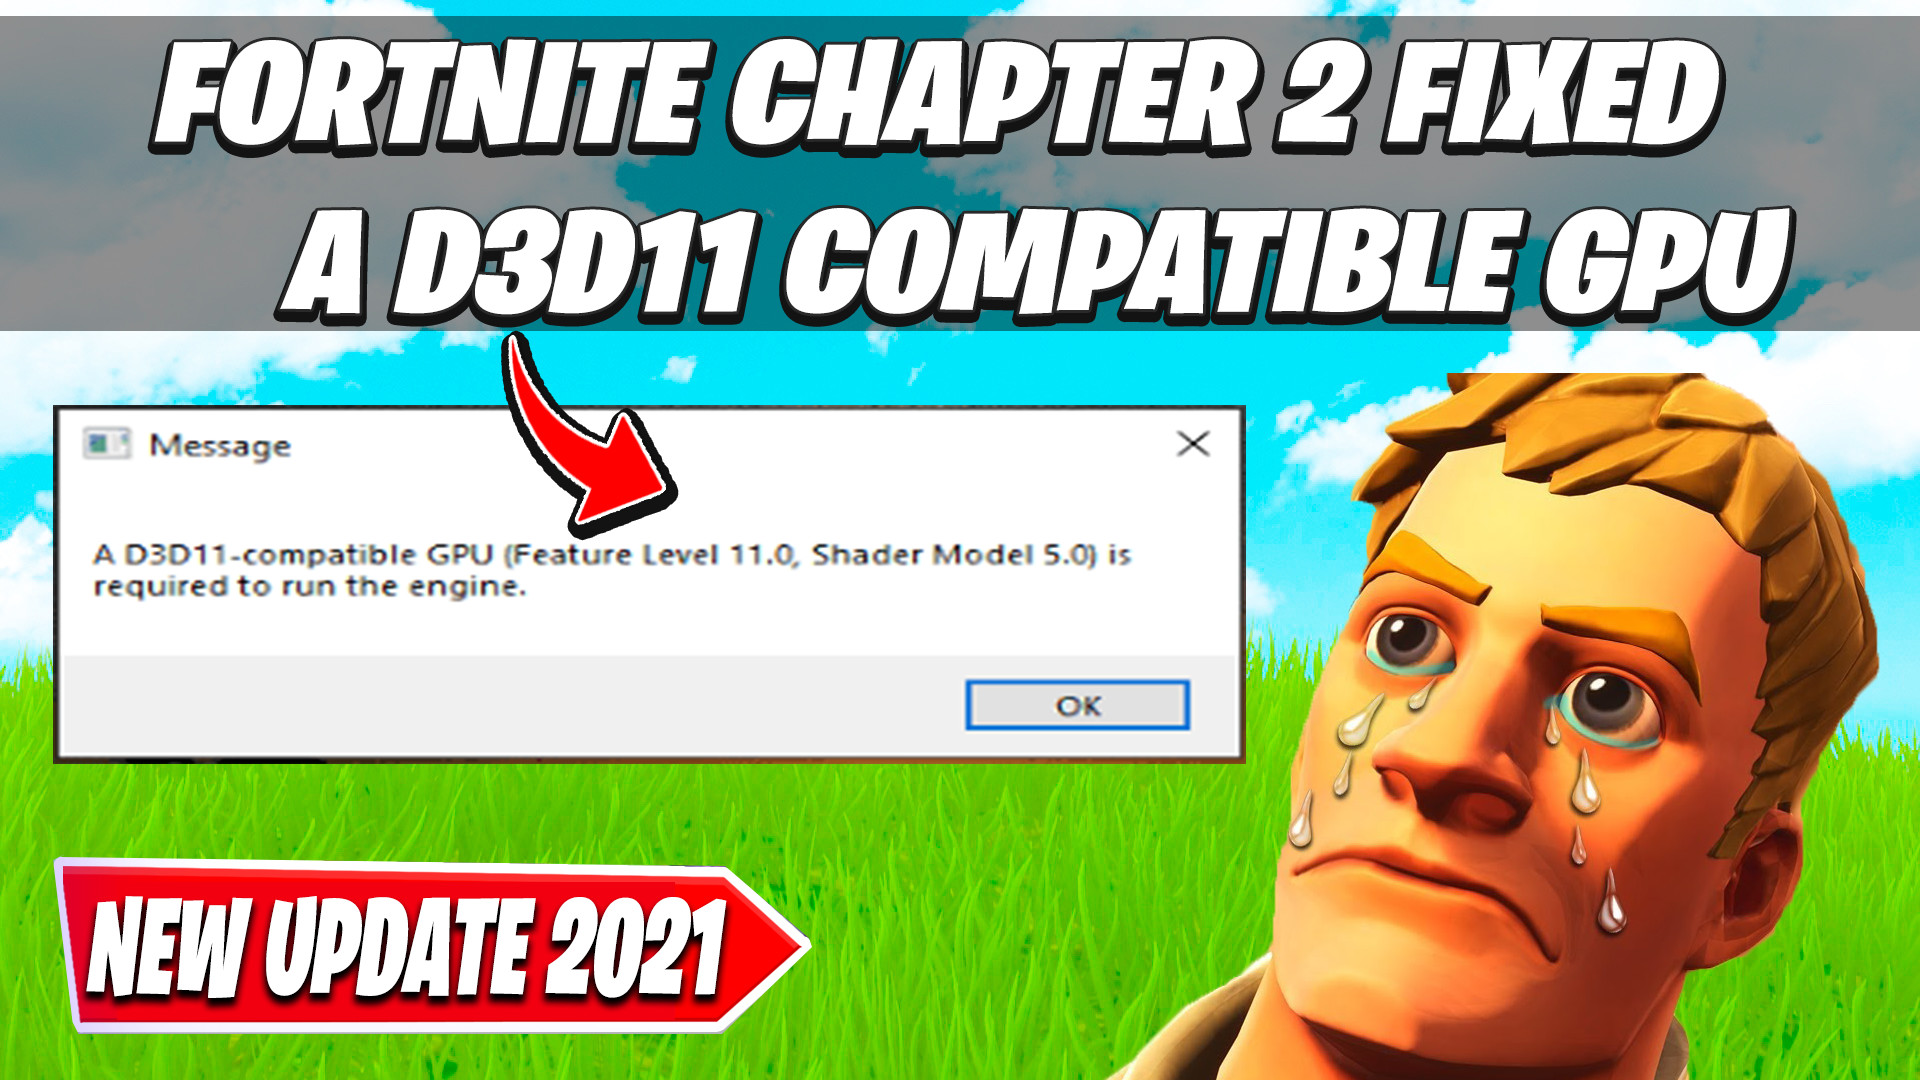 D3d feature level 12 0. A d3d11-compatible GPU (feature Level 11.0, Shader model 5.0) is required to Run the engine.. Ошибка в ФОРТНАЙТ A d3d11-compatible GPU. D3d11 compatible GPU feature Level 11.0 Shader model 5.0 a. A d3d11 compatible GPU feature Level.